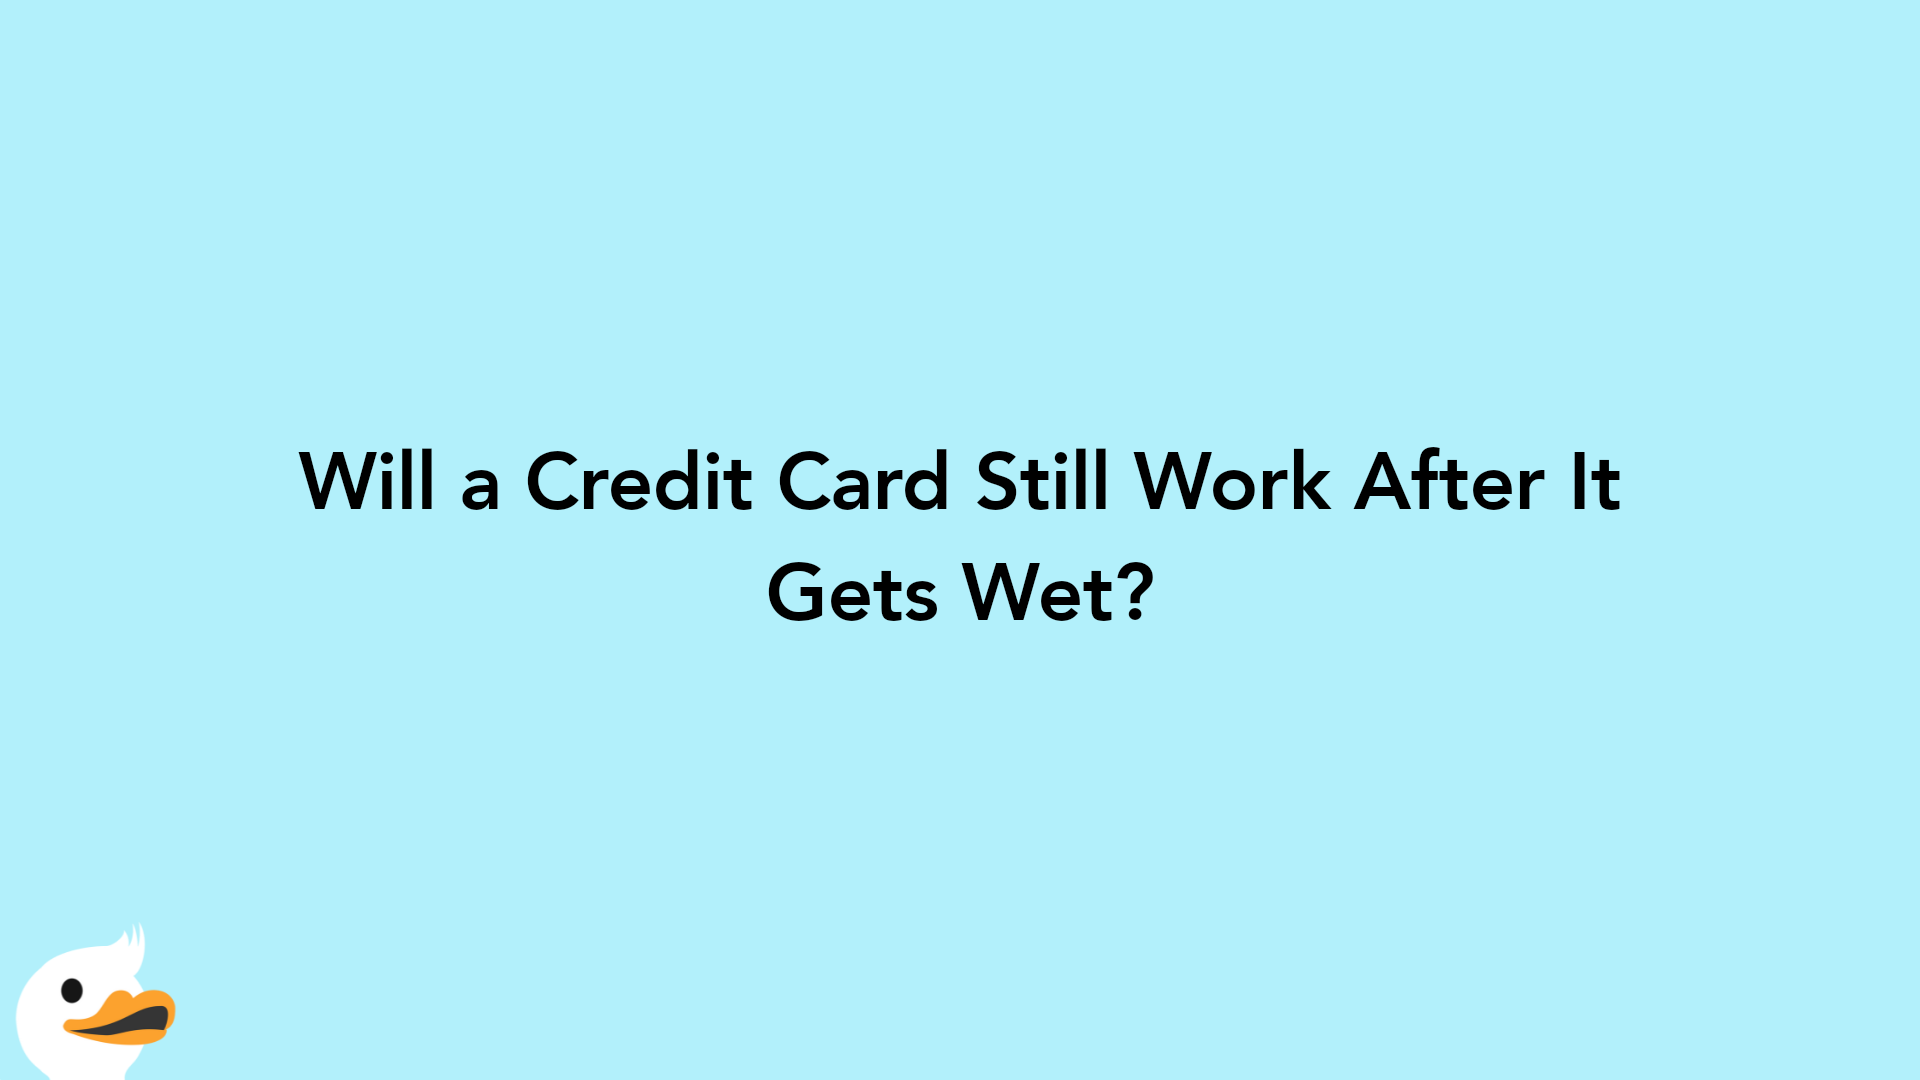 Will a Credit Card Still Work After It Gets Wet?